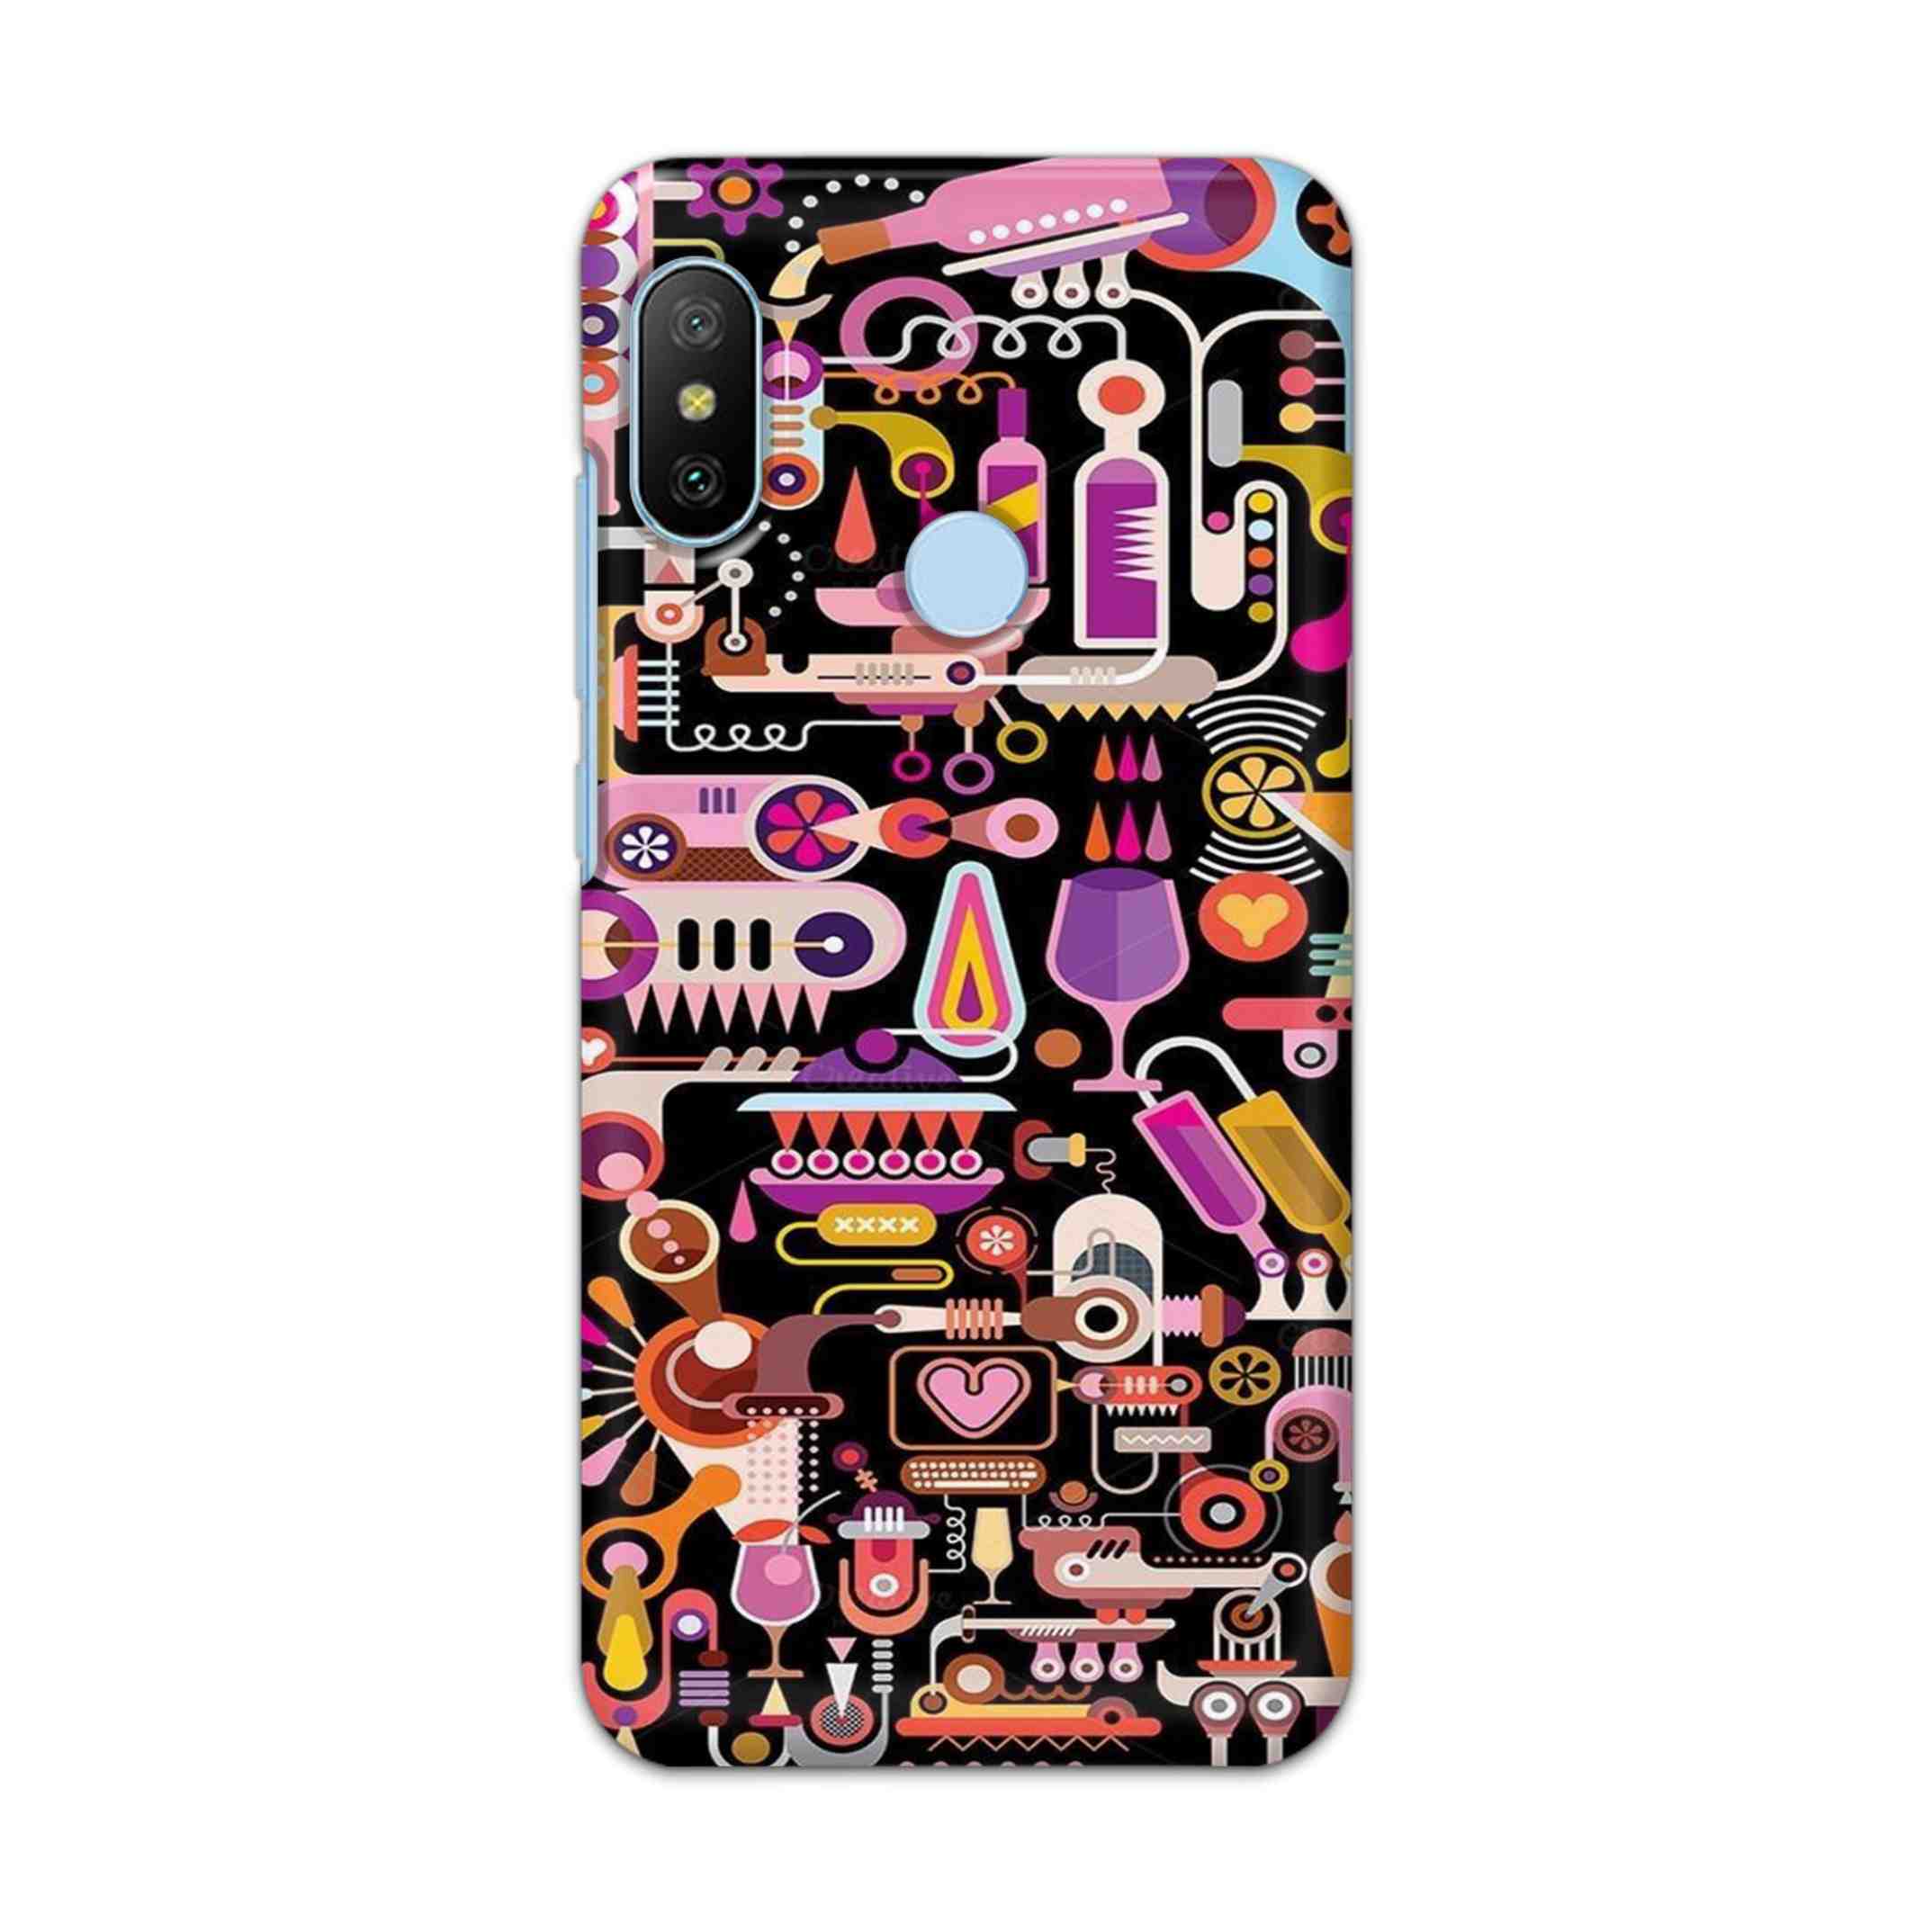 Buy Art Hard Back Mobile Phone Case/Cover For Xiaomi Redmi 6 Pro Online